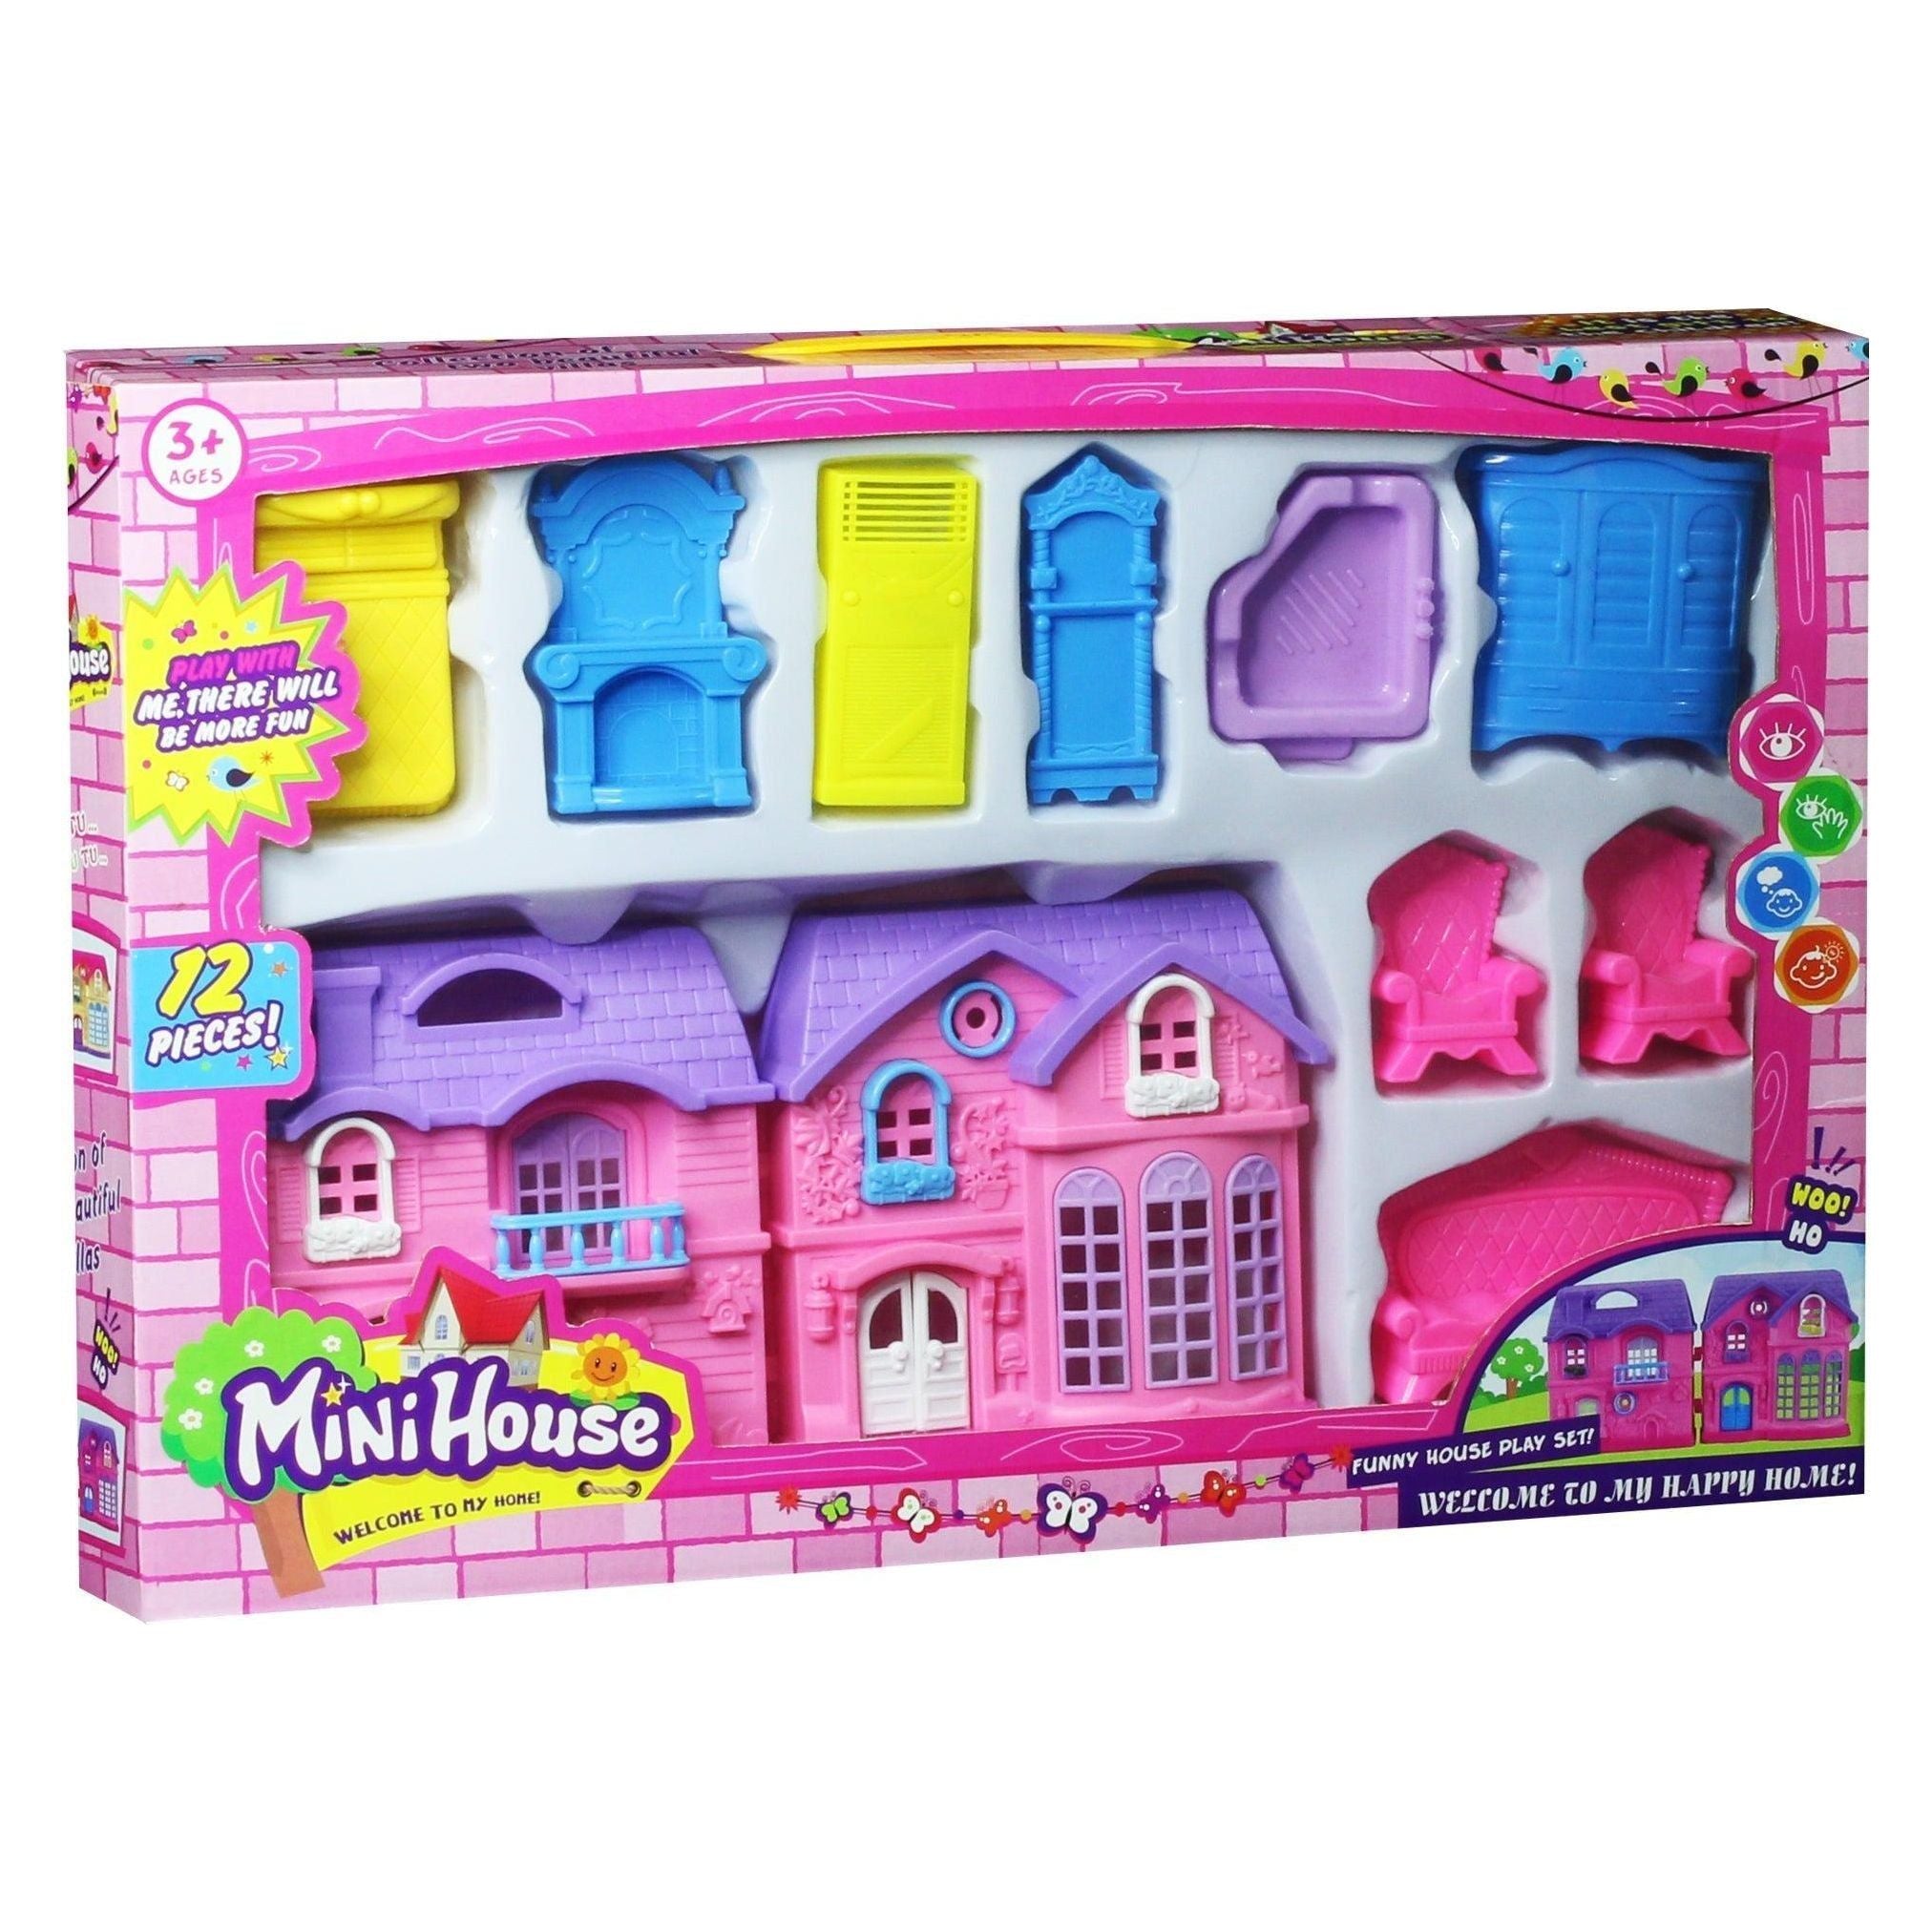 Mini House With New Style Furniture,20 Funny House Play Set 12 Pieces - BumbleToys - 4+ Years, Doll House, Dolls, Girls, Toy House